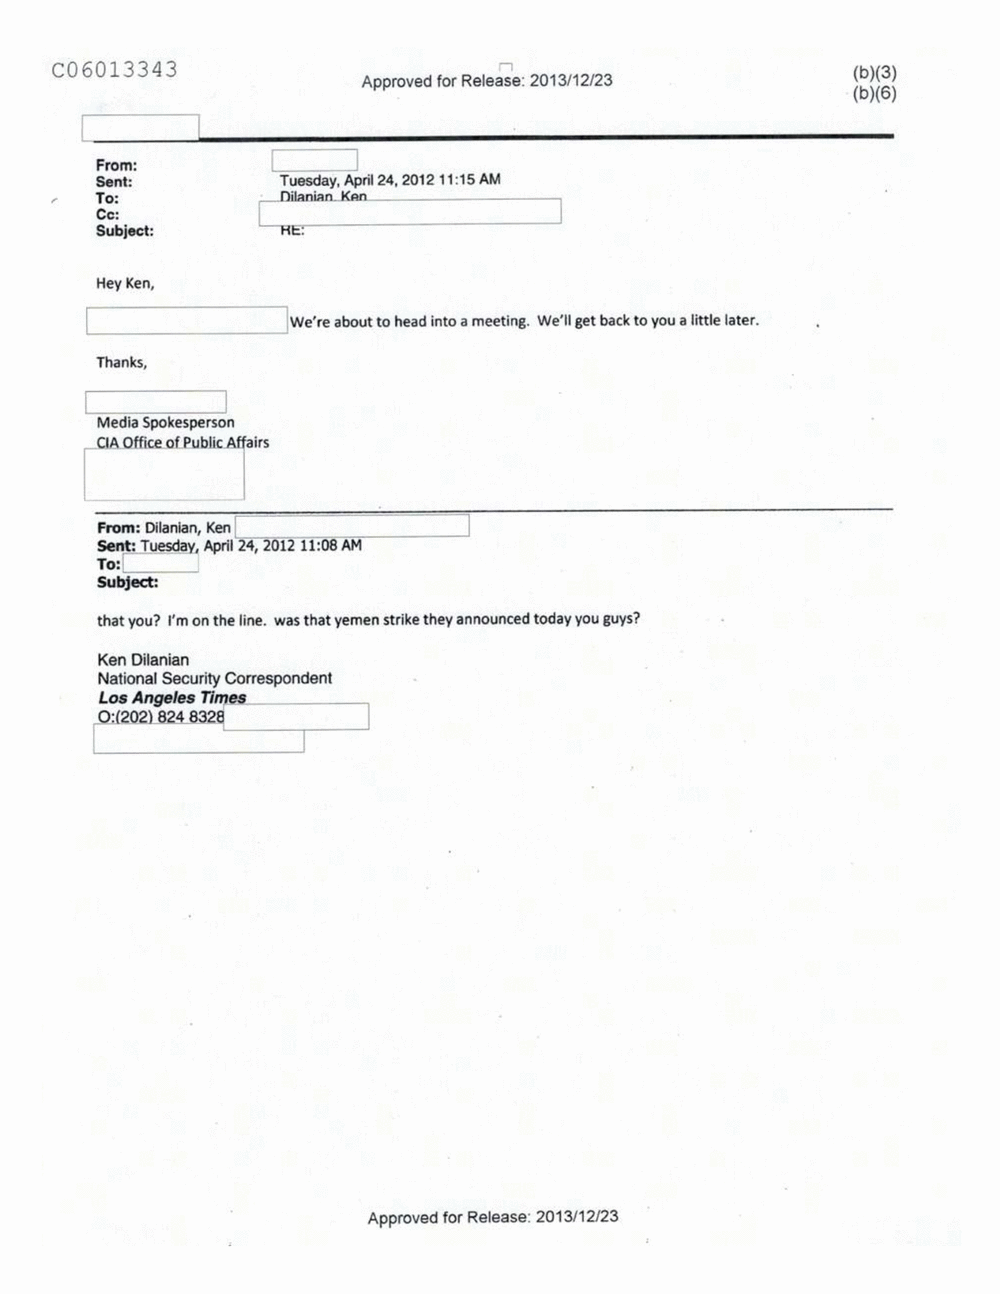 Page 251 from Email Correspondence Between Reporters and CIA Flacks